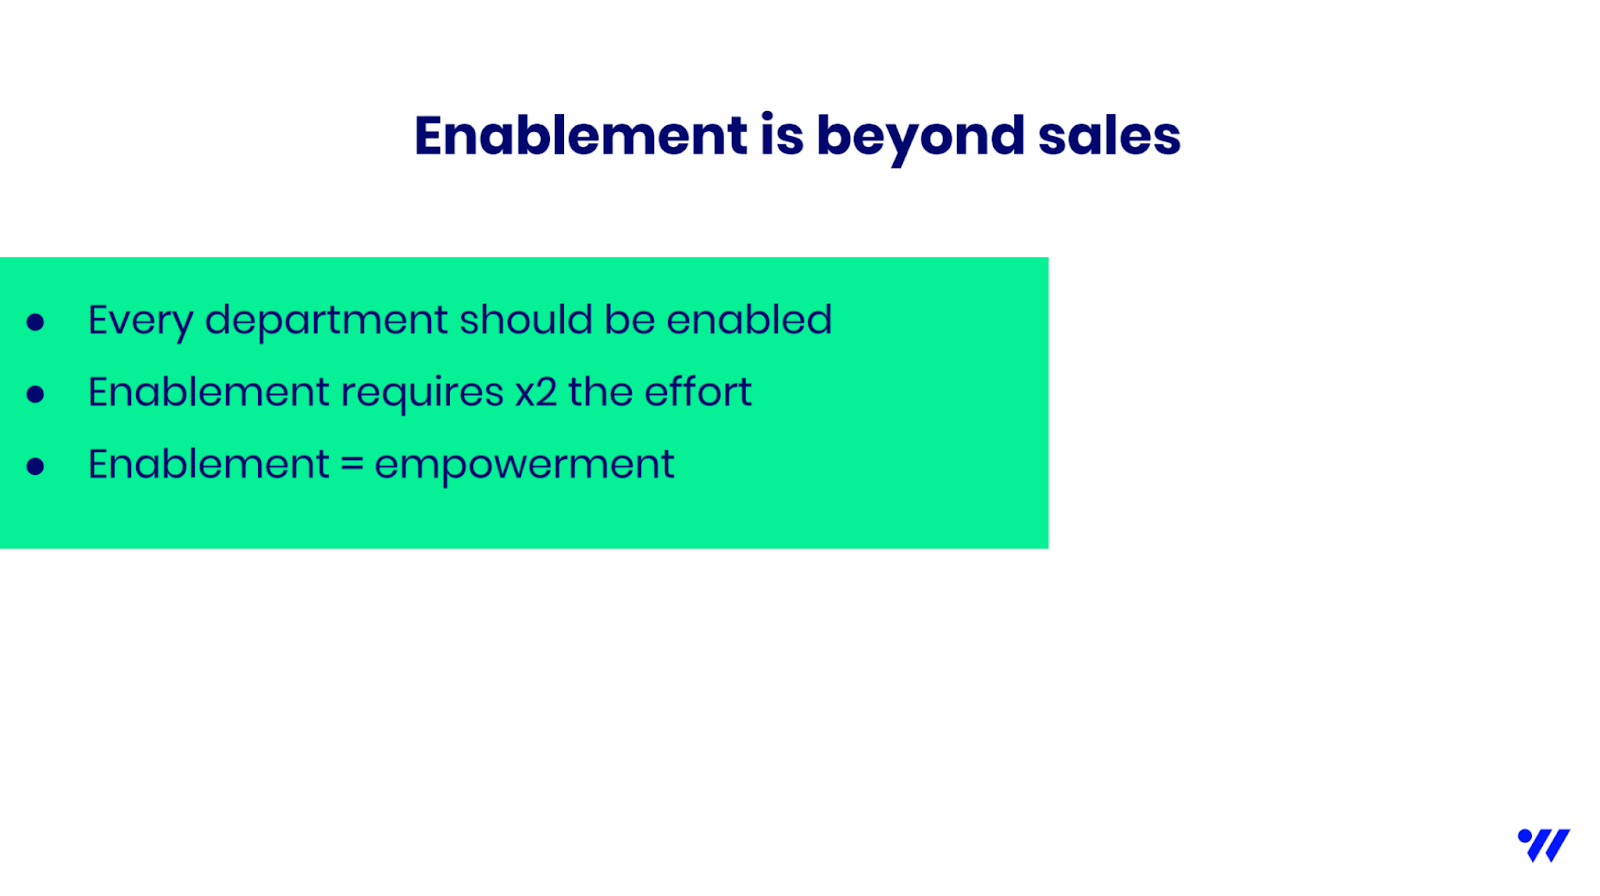 Enablement goes far beyond sales.